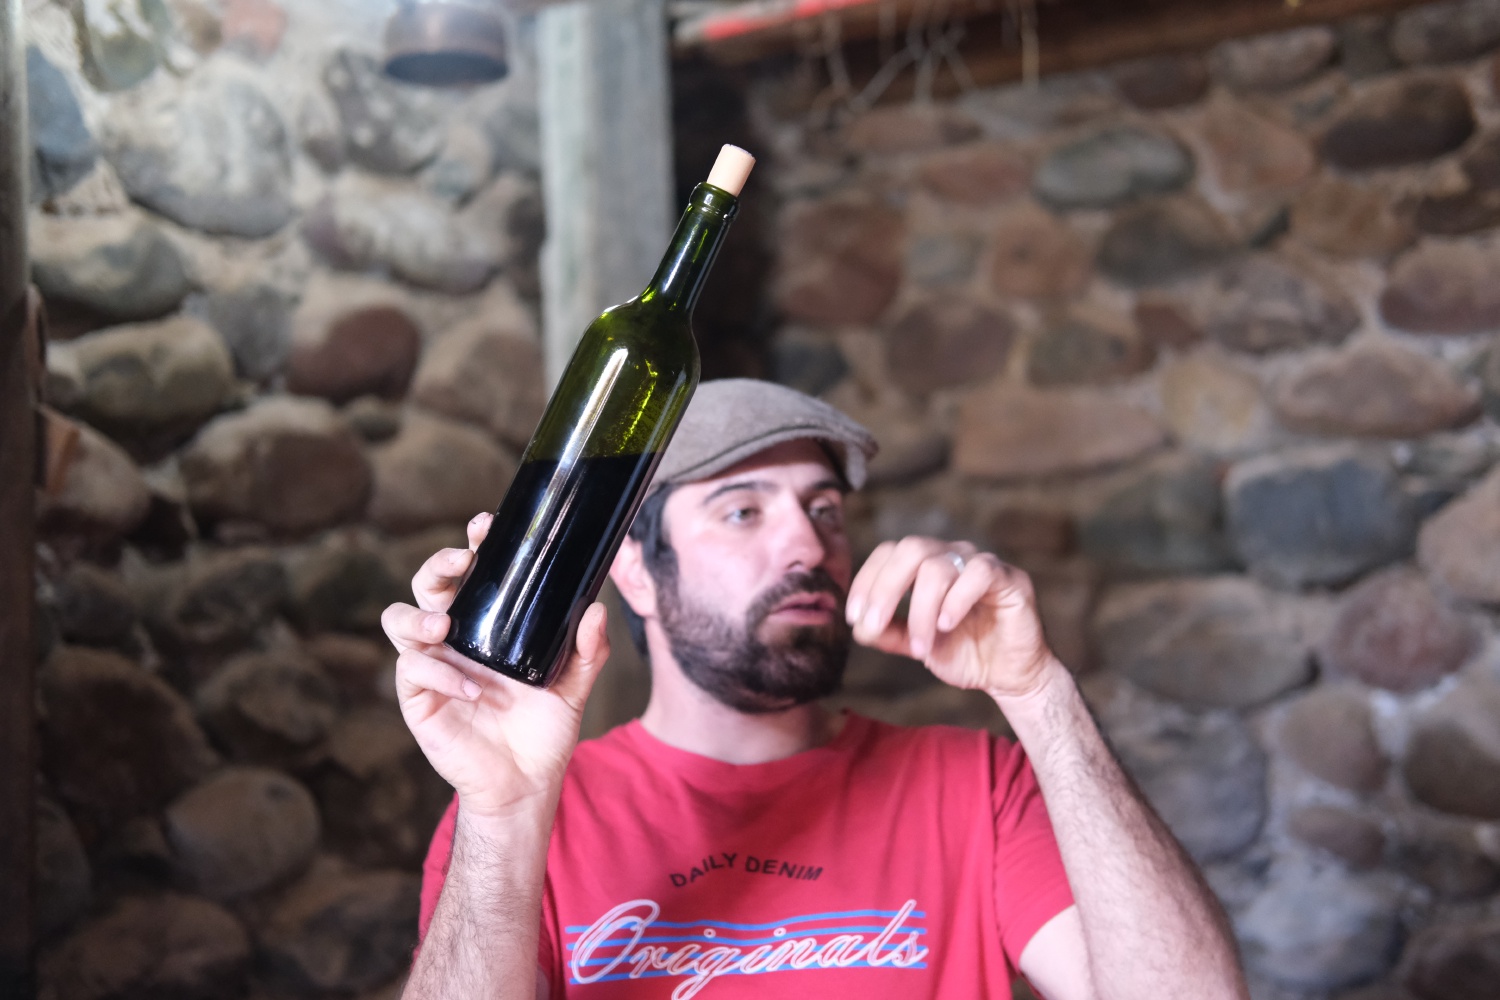 His are natural wines, meaning he doesn't add or use any chemicals in his vineyards and winemaking process. Here he explains that sediment marks on the bottle are natural.